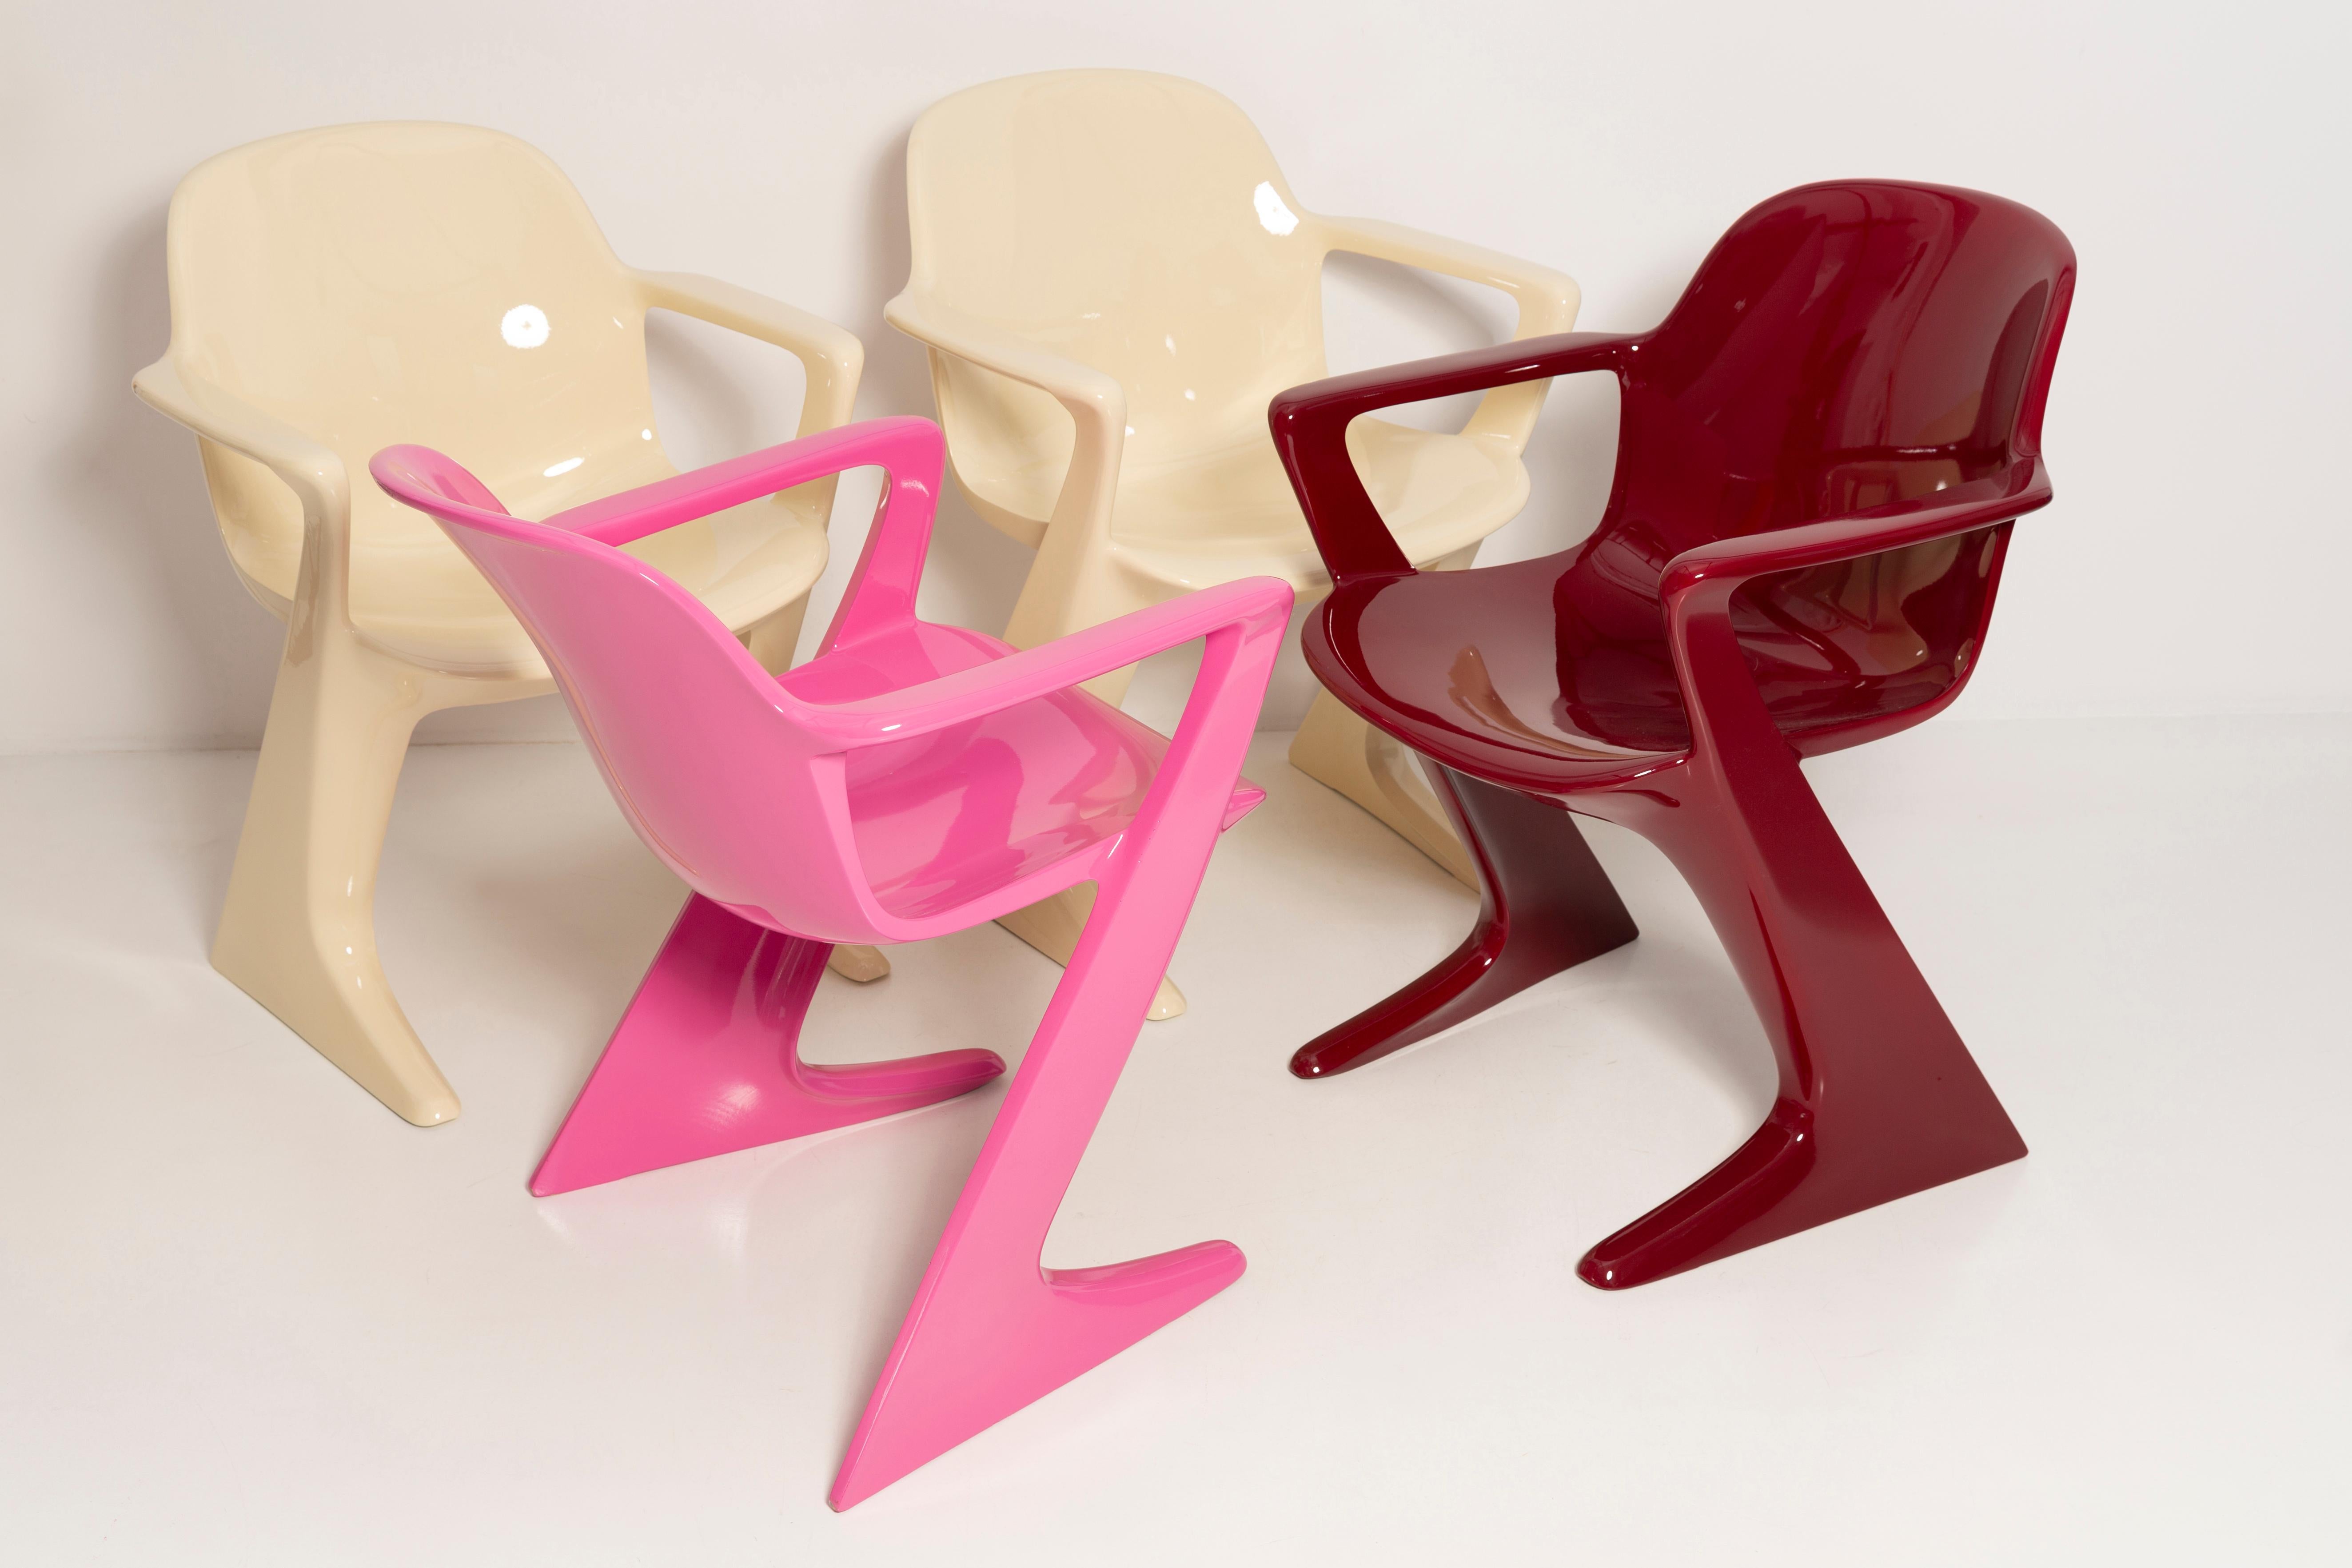 This model is called Z-chair. Designed in 1968 in the GDR by Ernst Moeckl and Siegfried Mehl, German Version of the Panton chair. Also called kangoroo chair or variopur chair. Produced in eastern Germany.

Chairs are after renovation - new semi